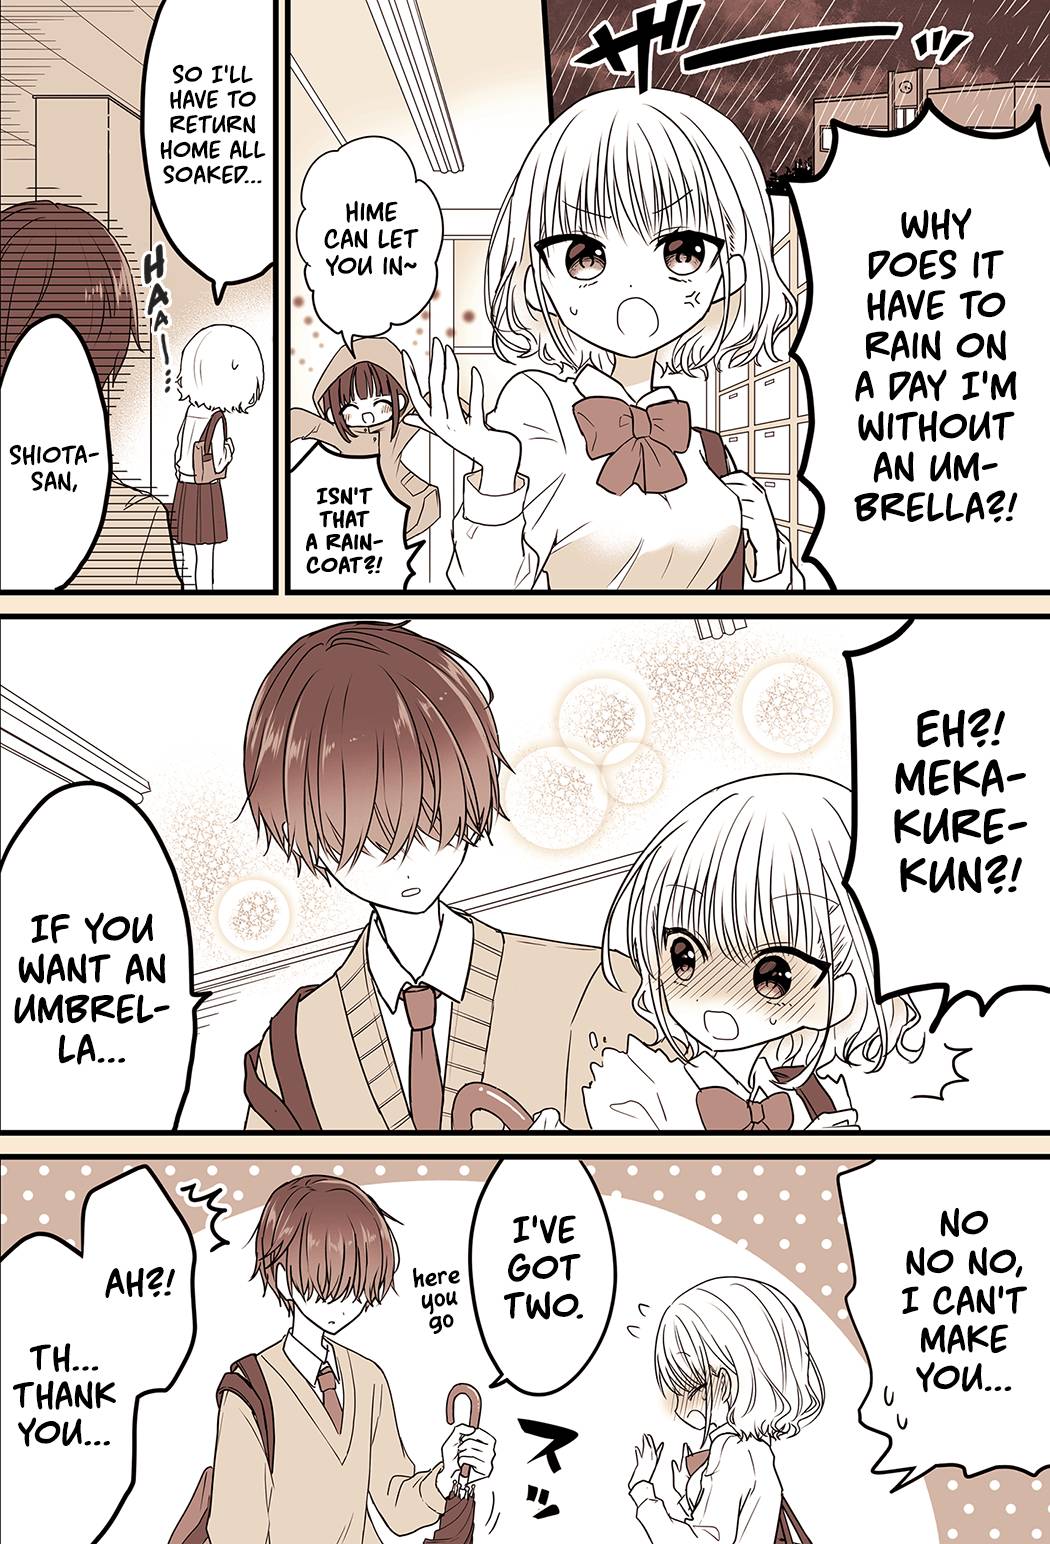 A Manga about being interested in a Mekakure Guy - chapter 3 - #2